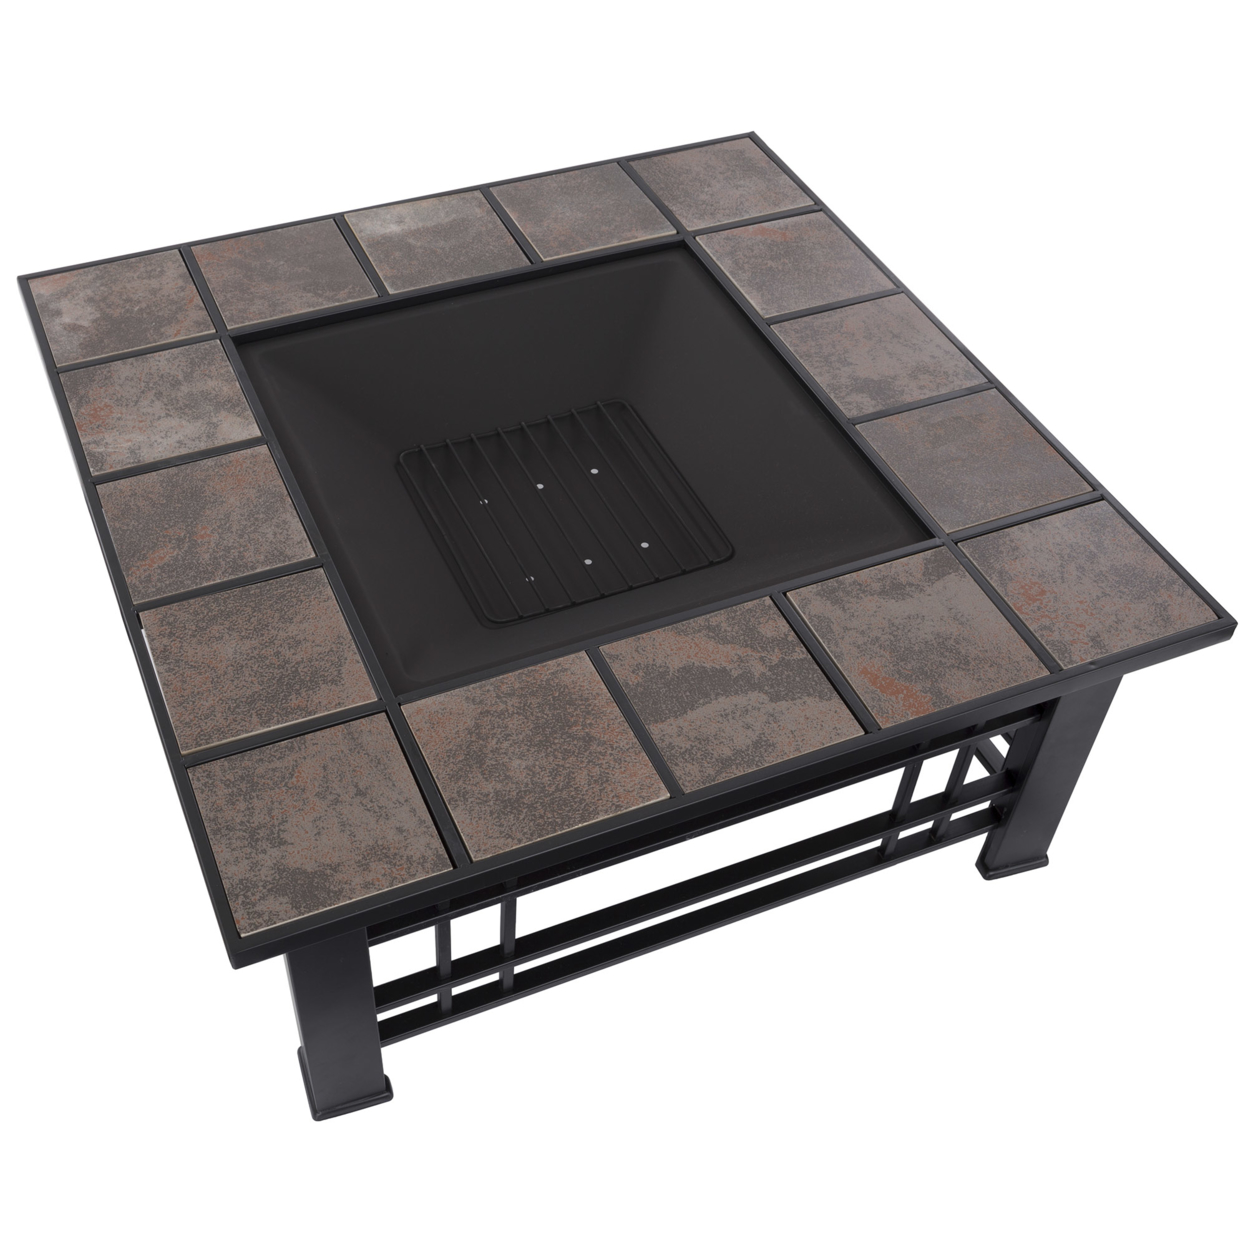 Fire Pit Set, Wood Burning Pit - Includes Spark Screen And Log Poker - Great For Outdoor And Patio, 32 Inch Tile Firepit